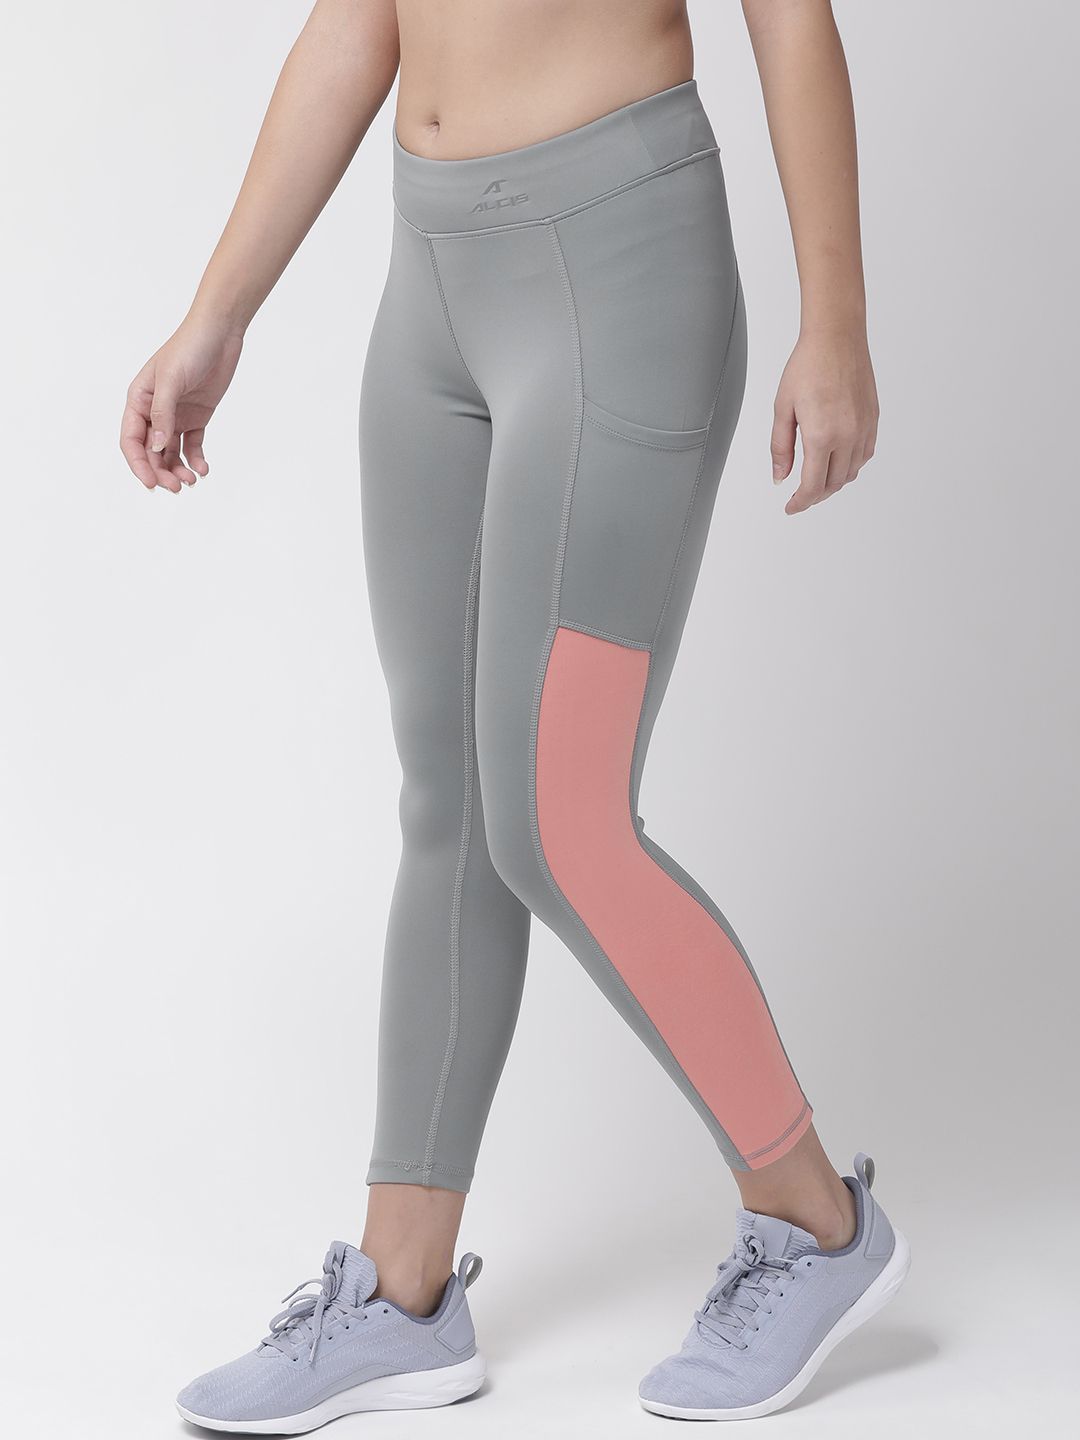 Alcis Women Grey Solid Tights Price in India